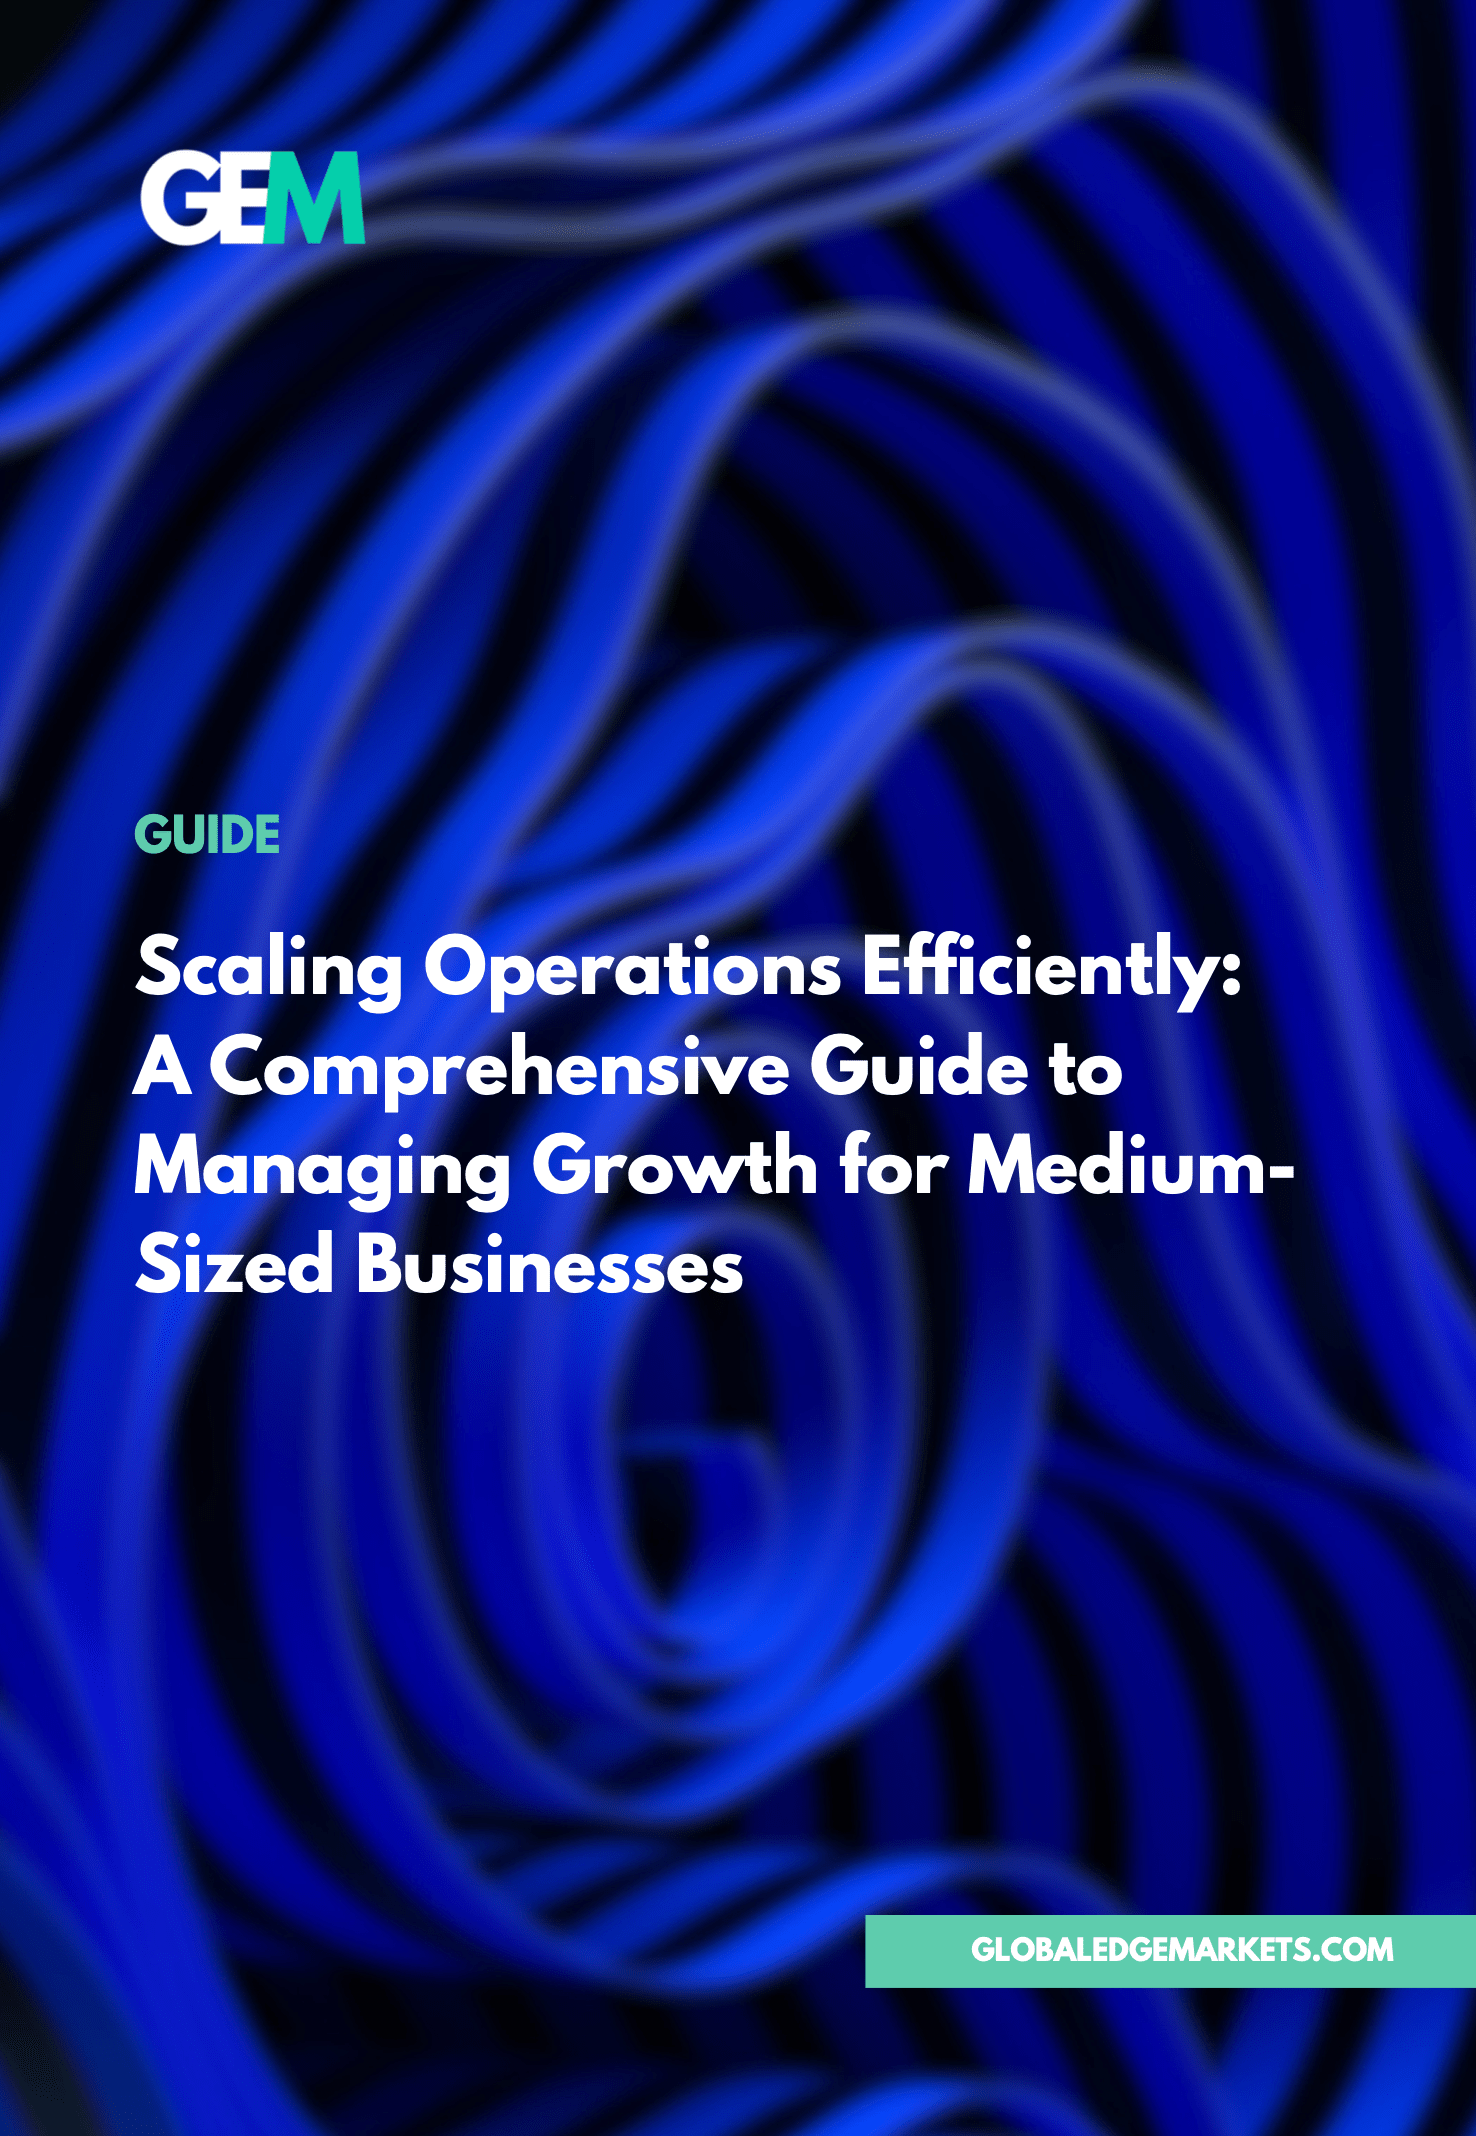 Scaling Operations Efficiently: A Comprehensive Guide to Managing Growth for Medium-Sized Businesses |GlobalEdgeMarkets